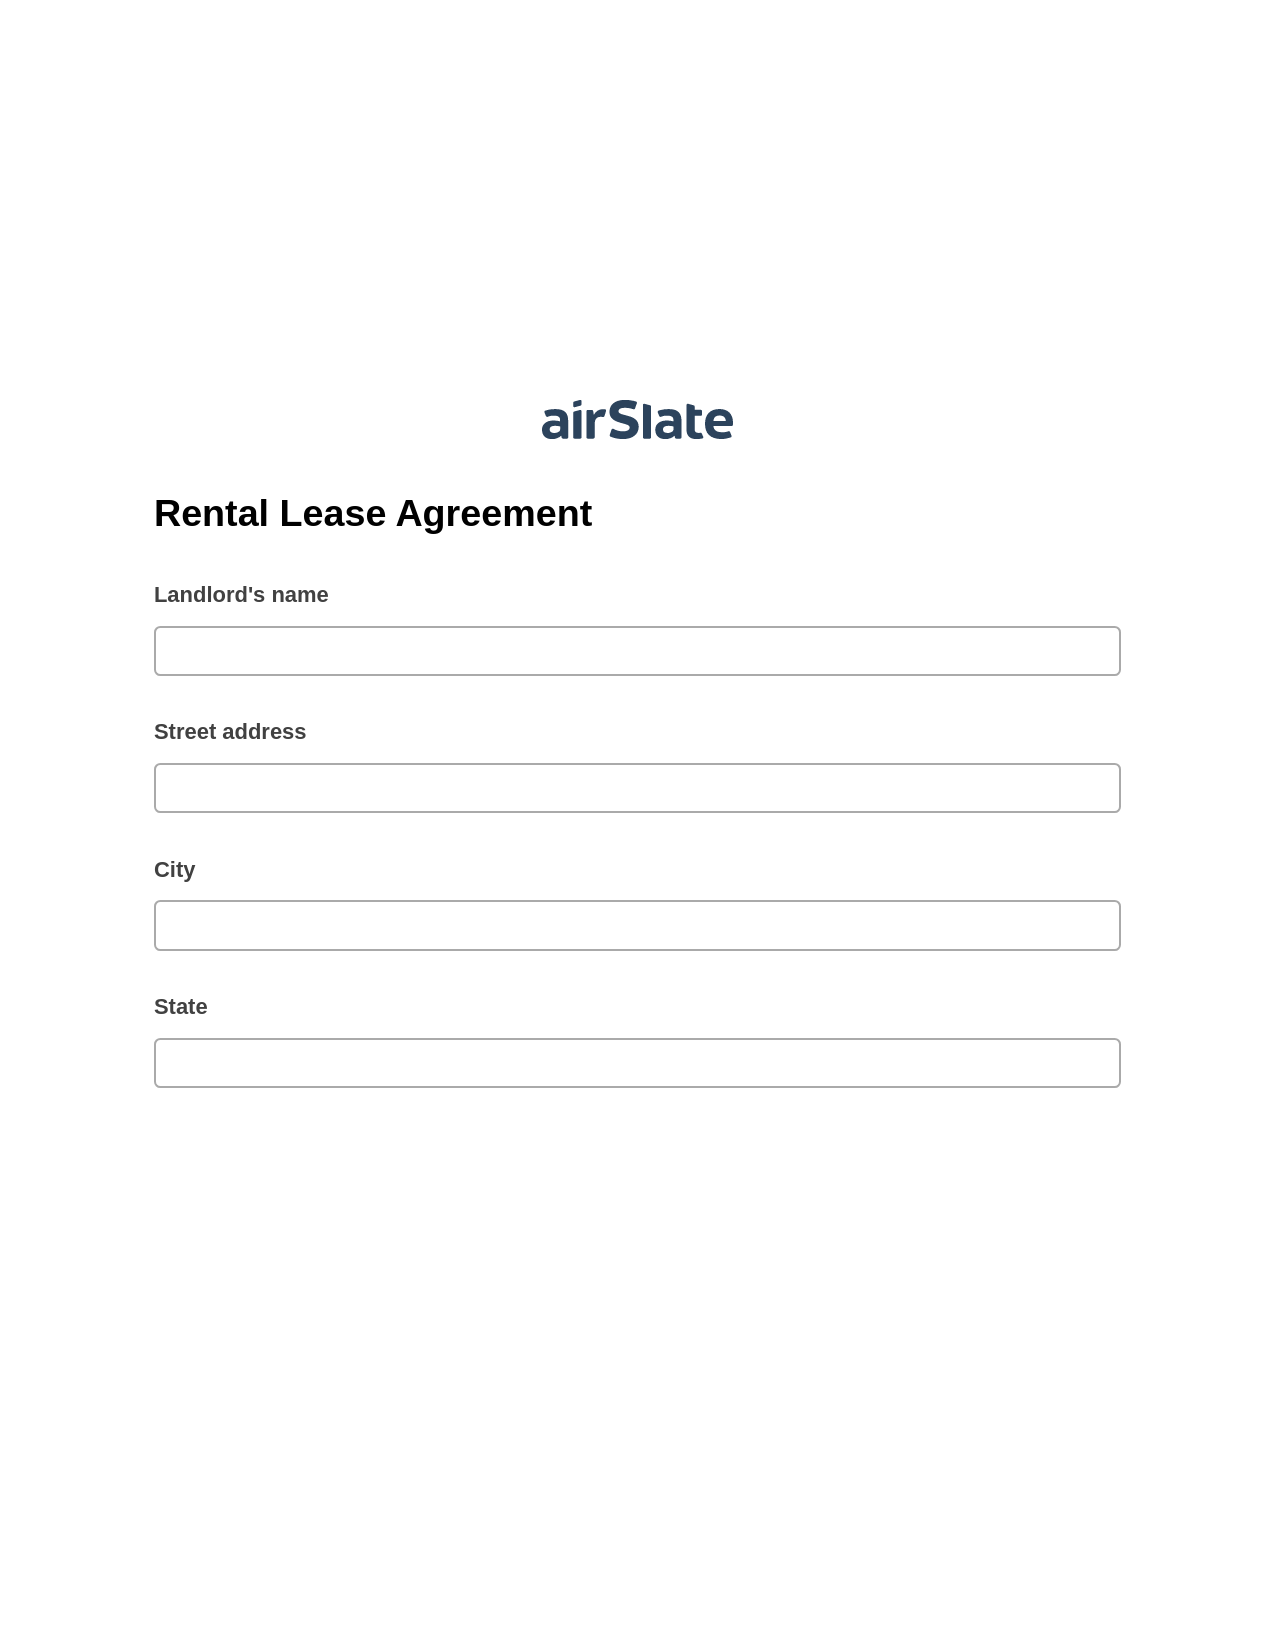 Rental Lease Agreement Pre-fill Document Bot, Document Hide Bot, Export to NetSuite Record Bot